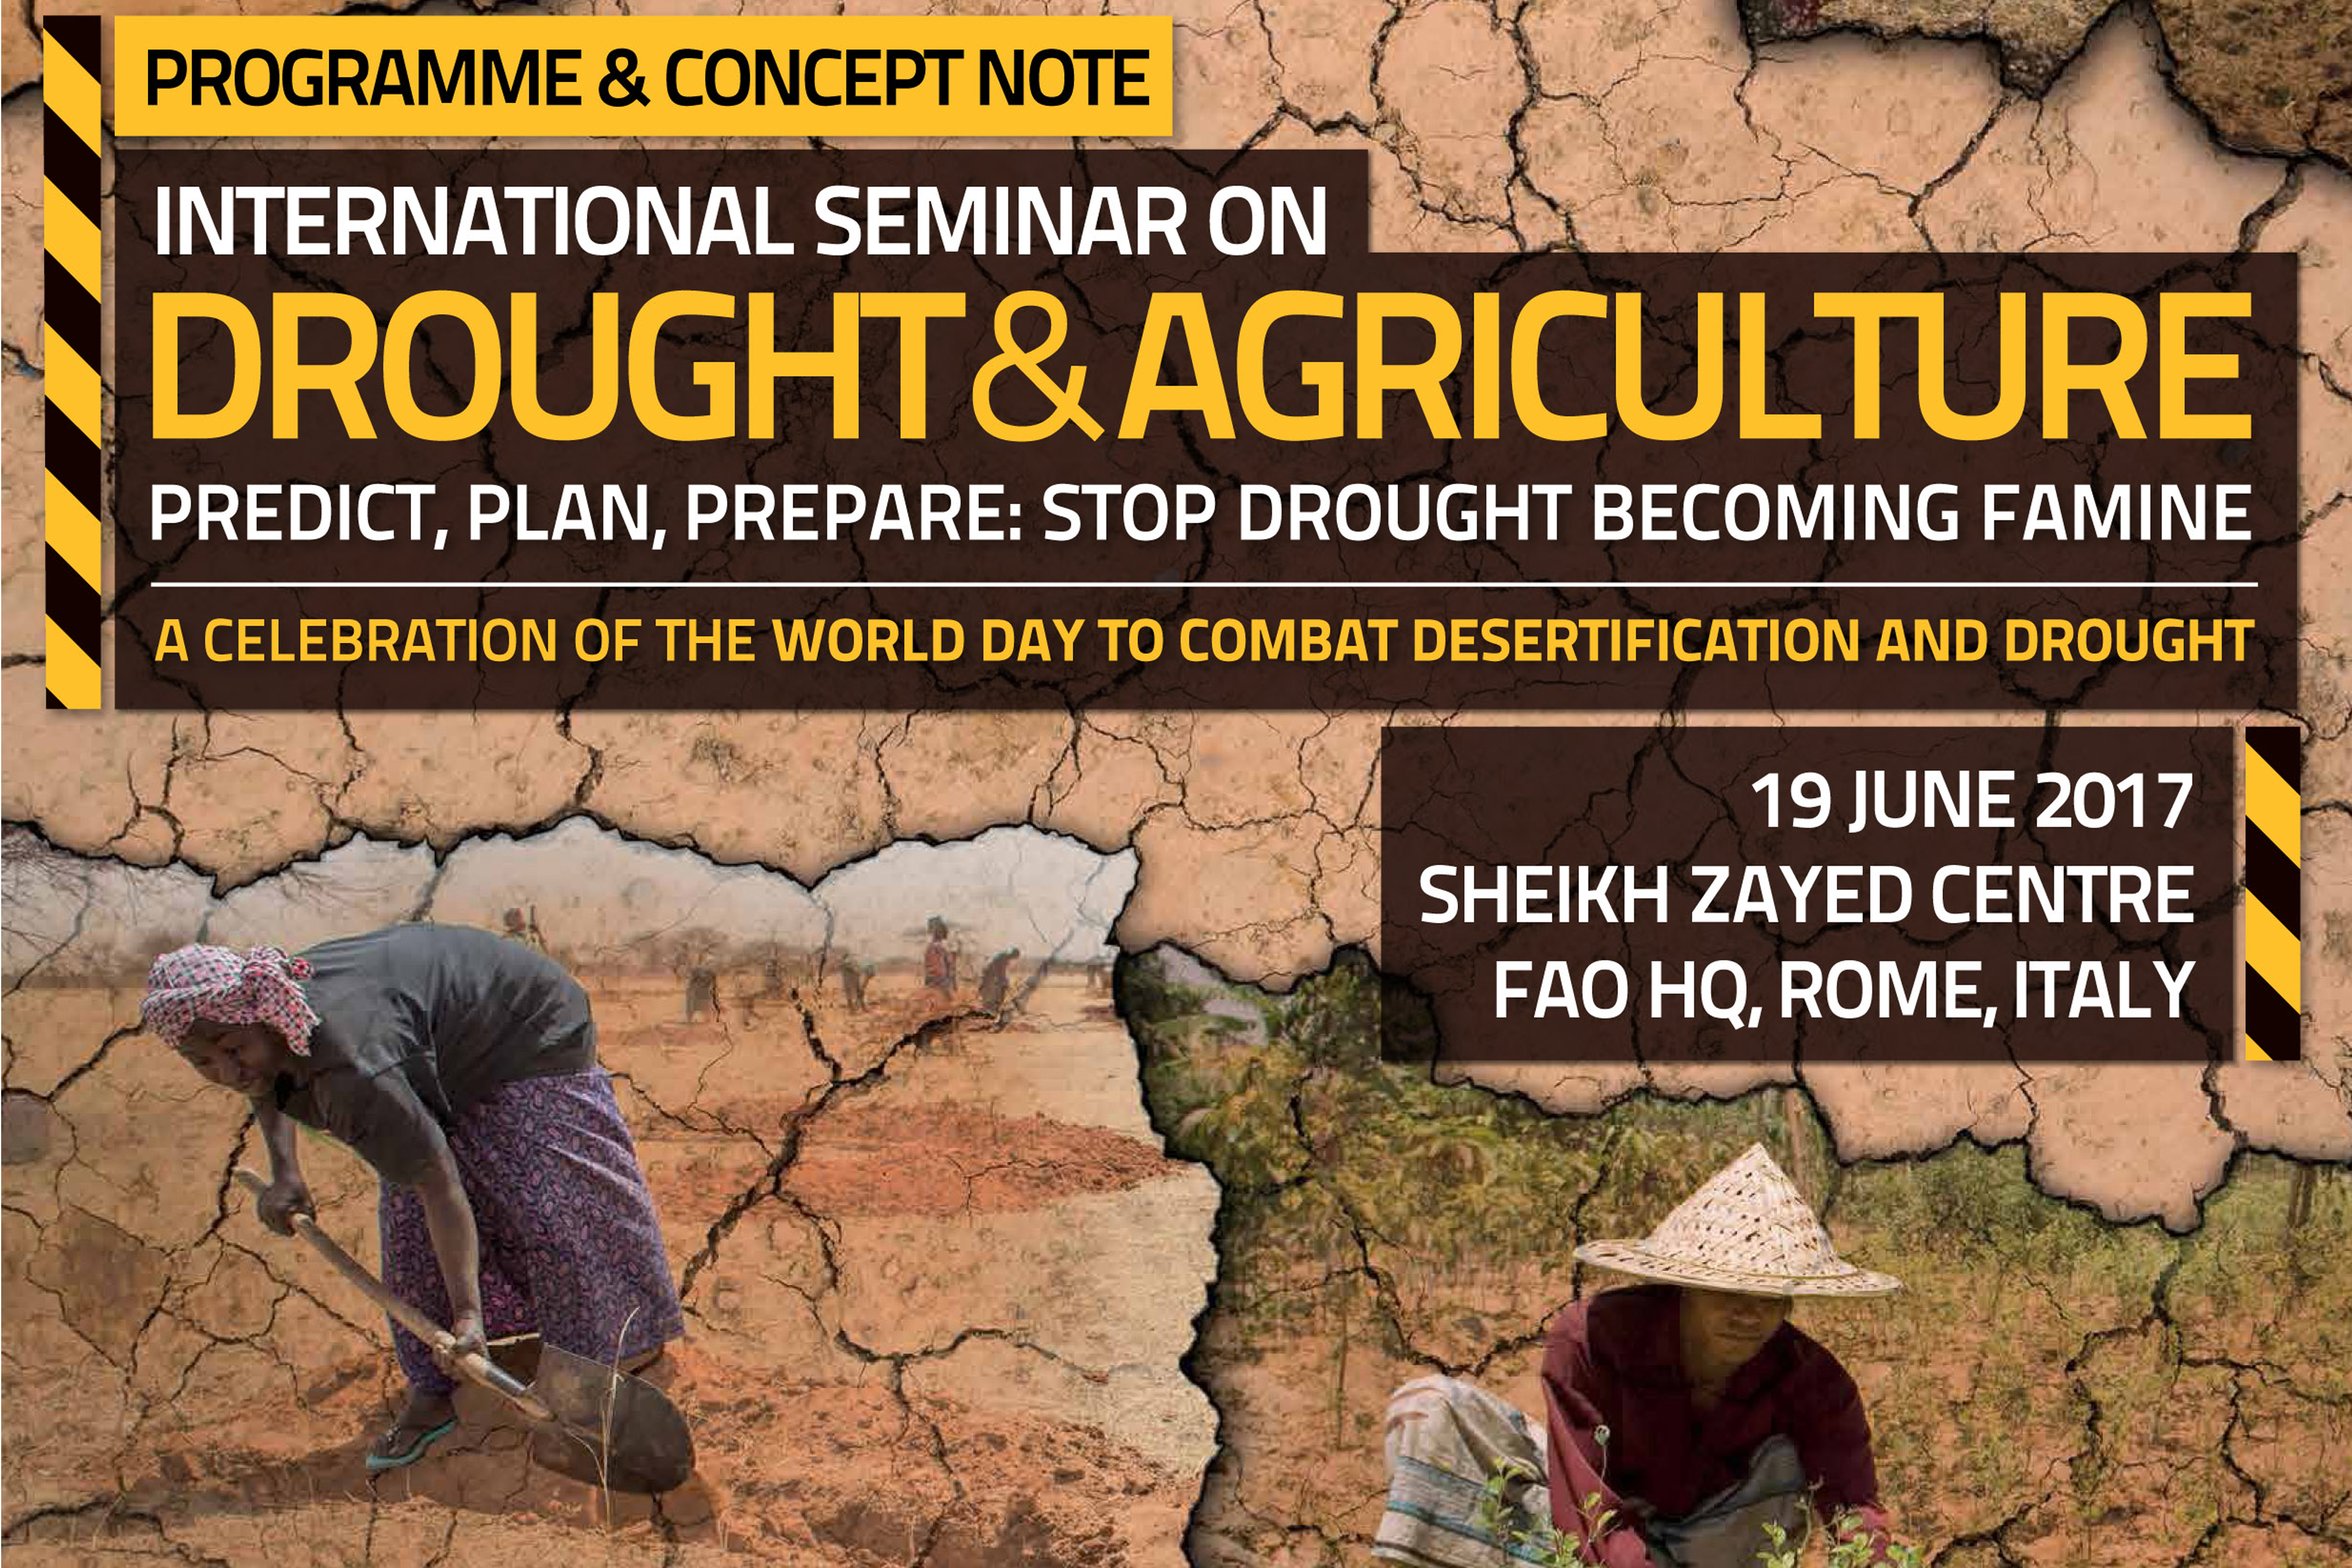 fao-hosts-intl-seminar-on-drought-co-organized-by-iran-and-netherlands